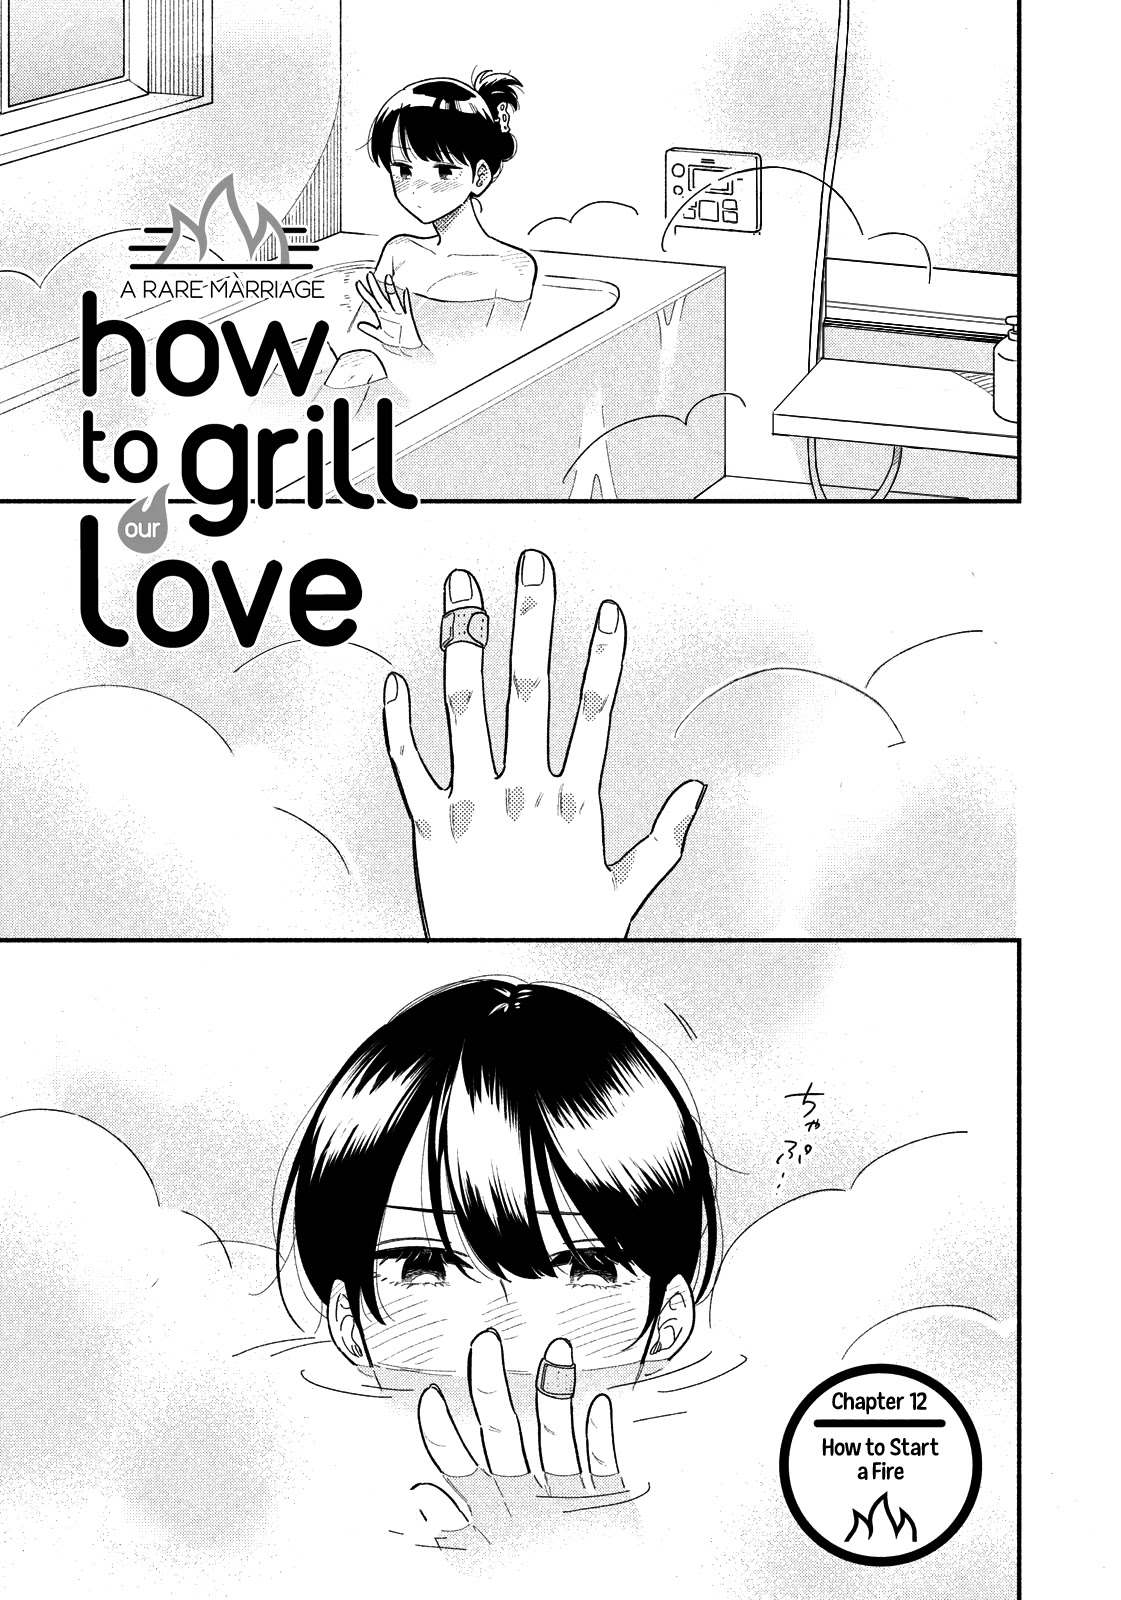 A Rare Marriage: How To Grill Our Love Chapter 12 #2